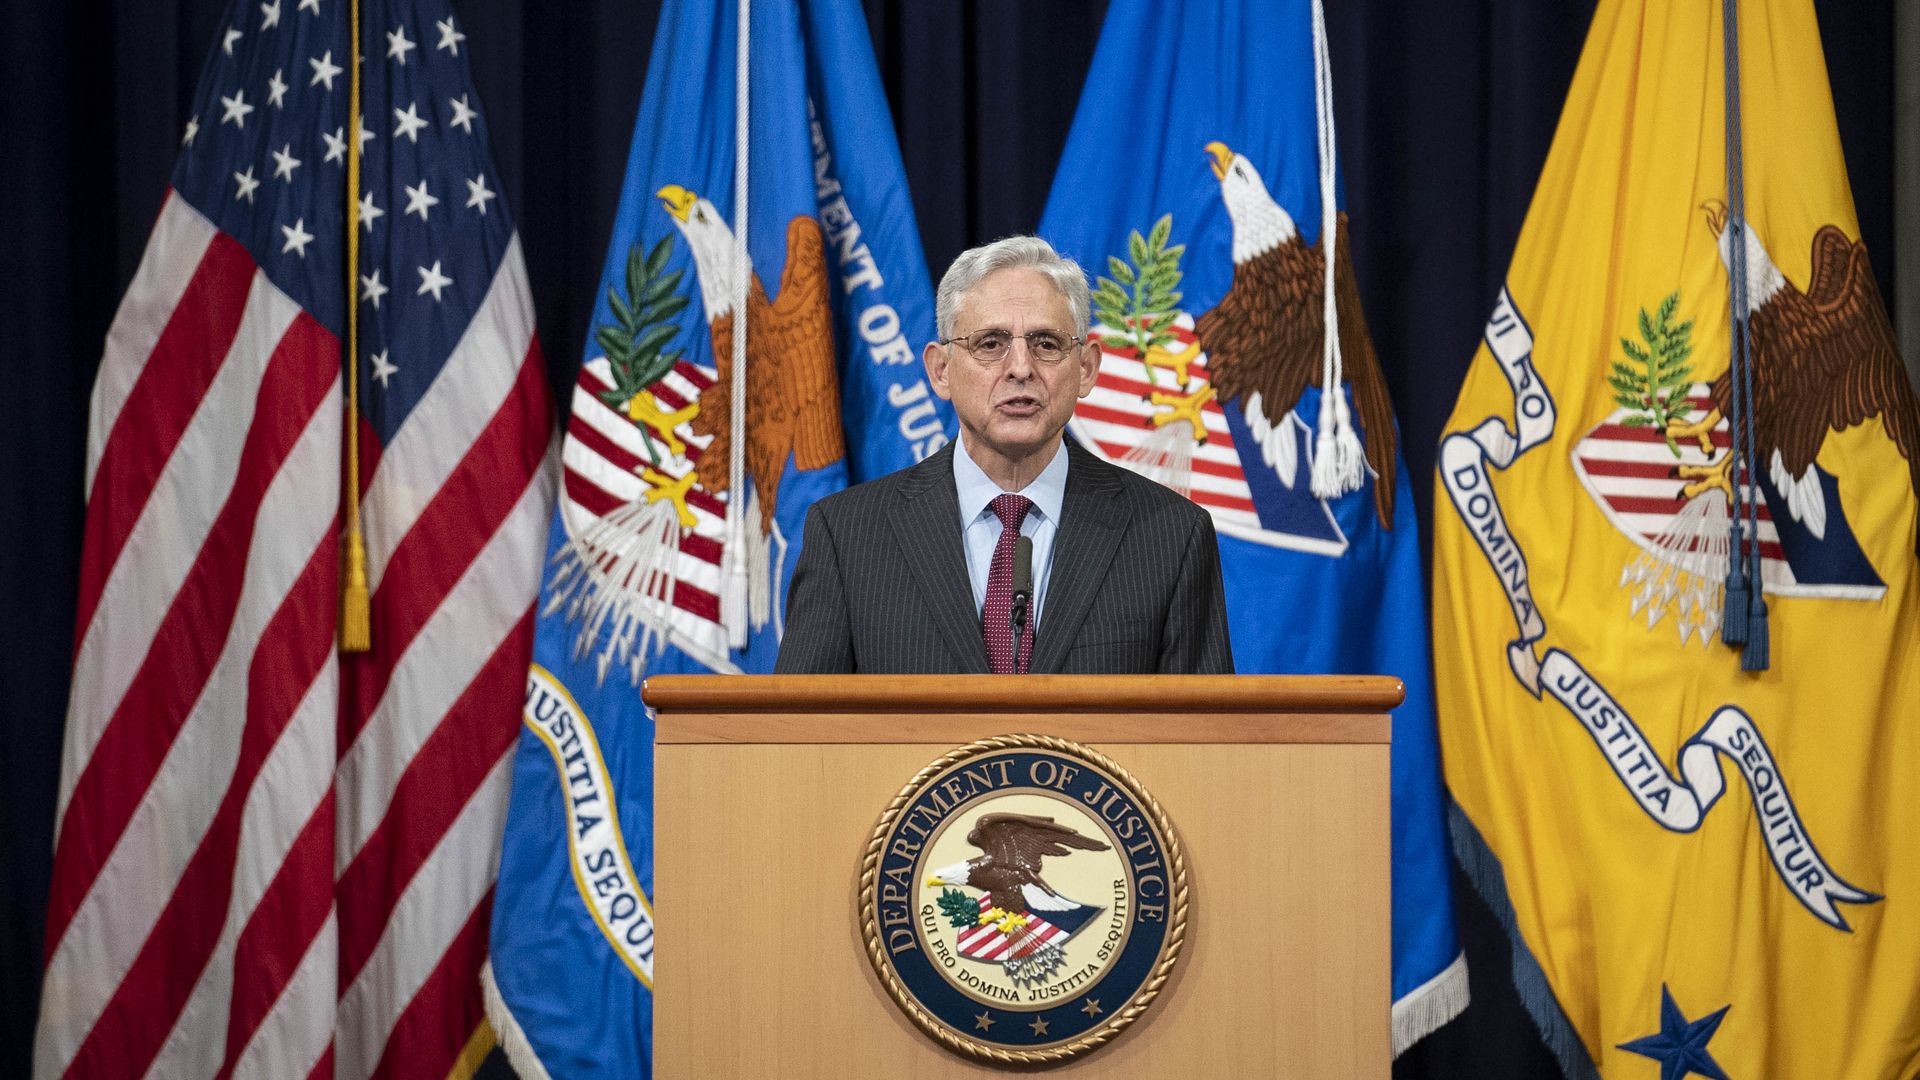 Merrick Garland, U.S. attorney general, speaks during an address at the Department of Justice in Washington, D.C., U.S., on Friday, Oct. 22, 2021.